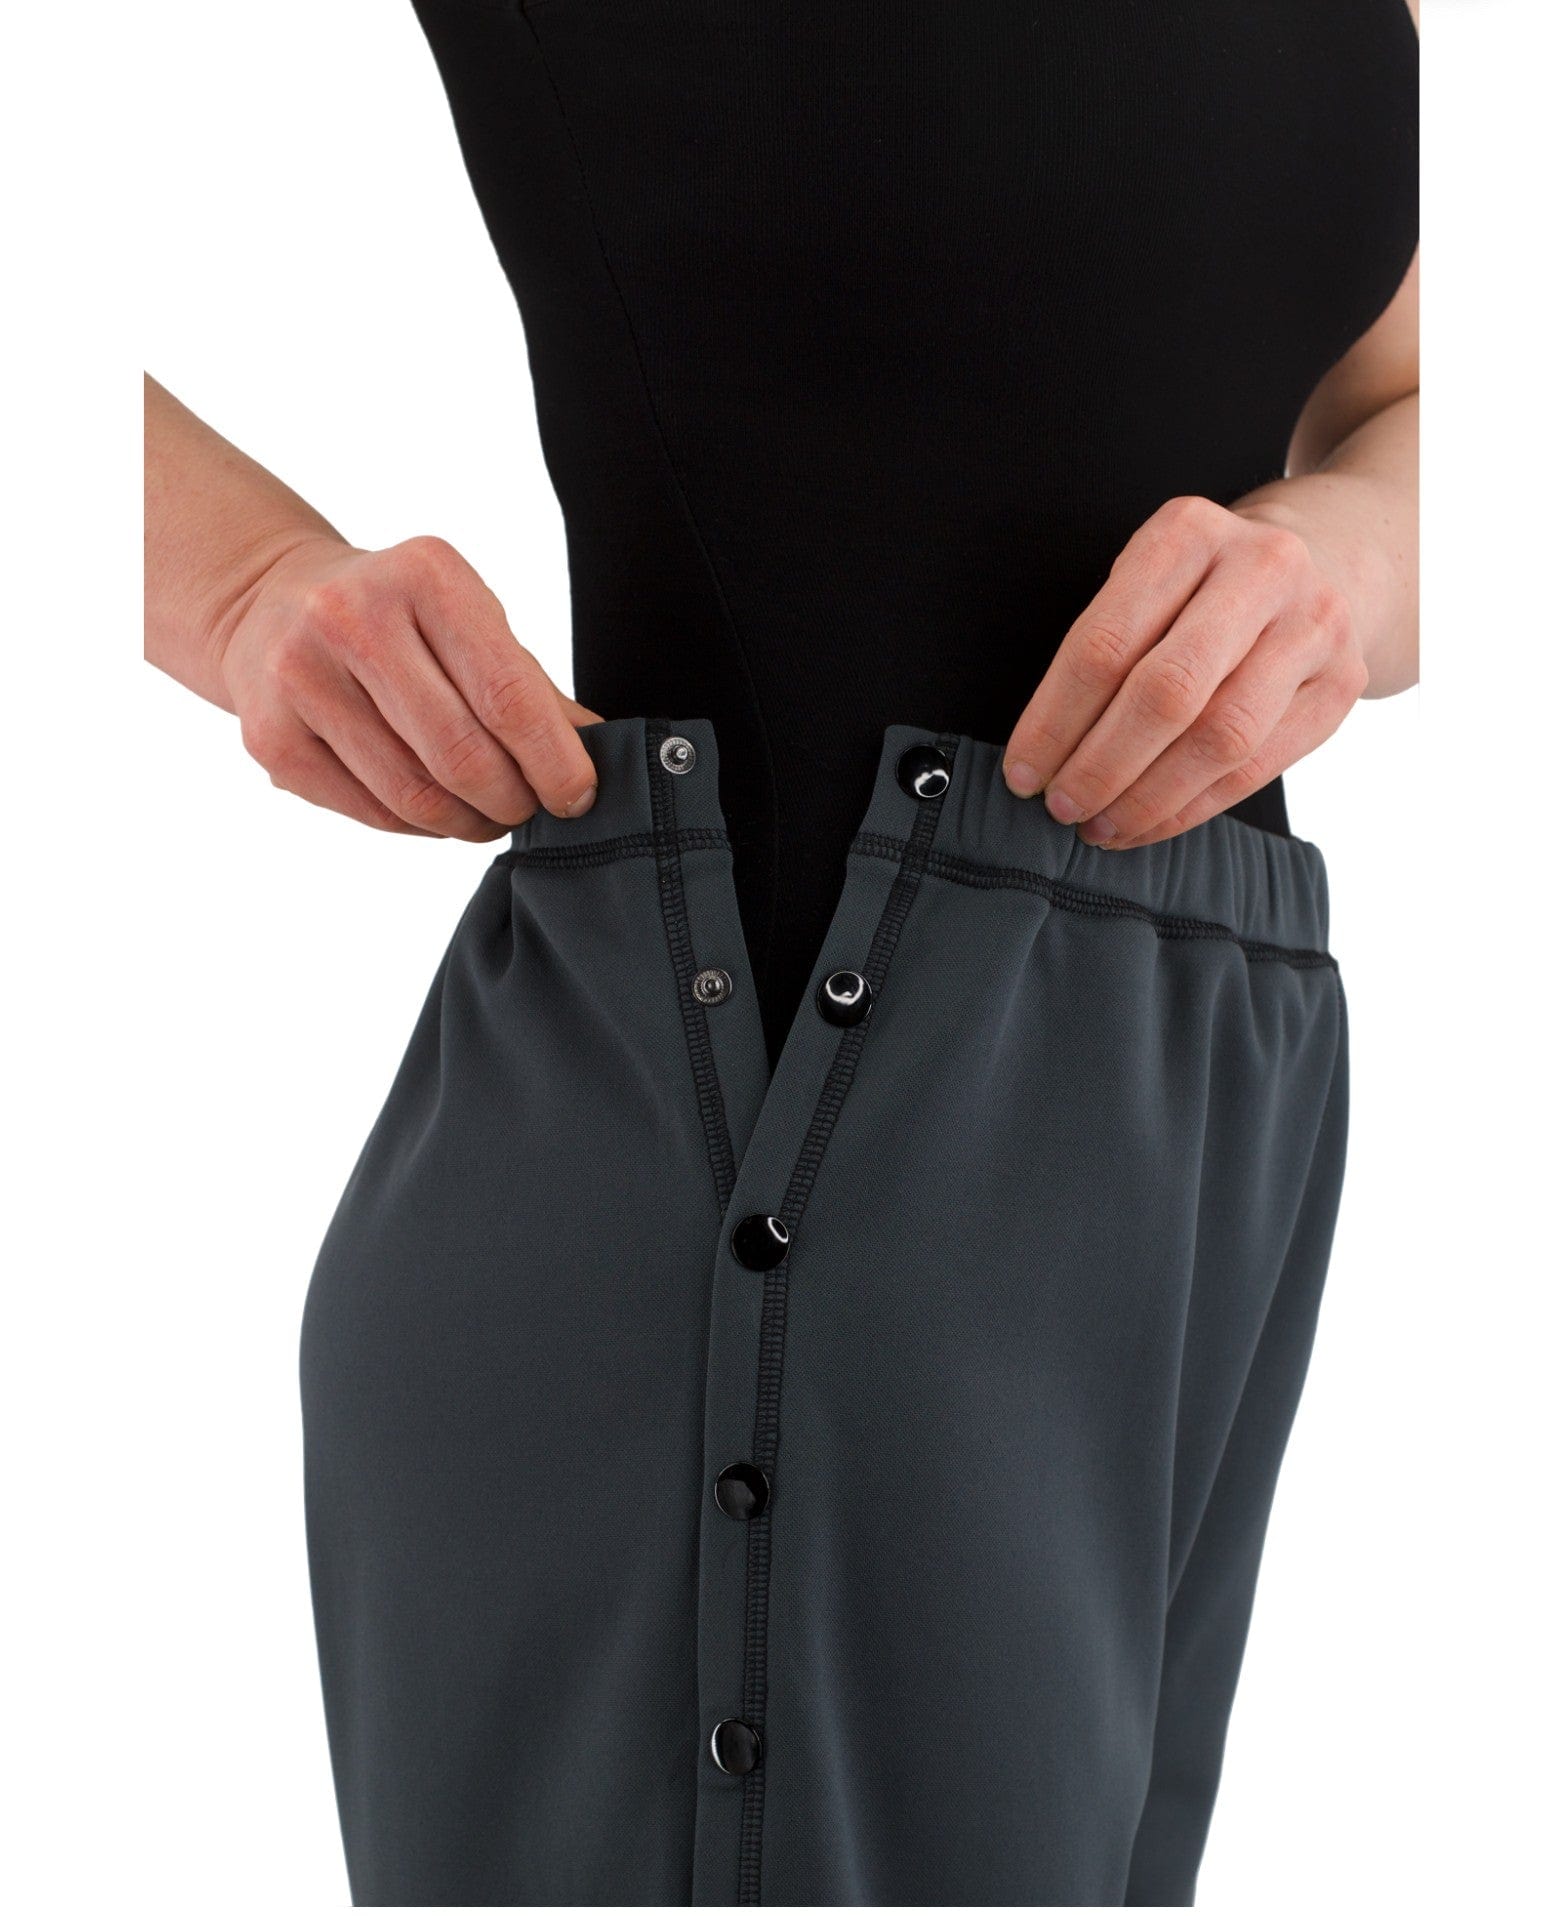 Surgery Tearaway Pants | Best Pants for Surgery Recovery